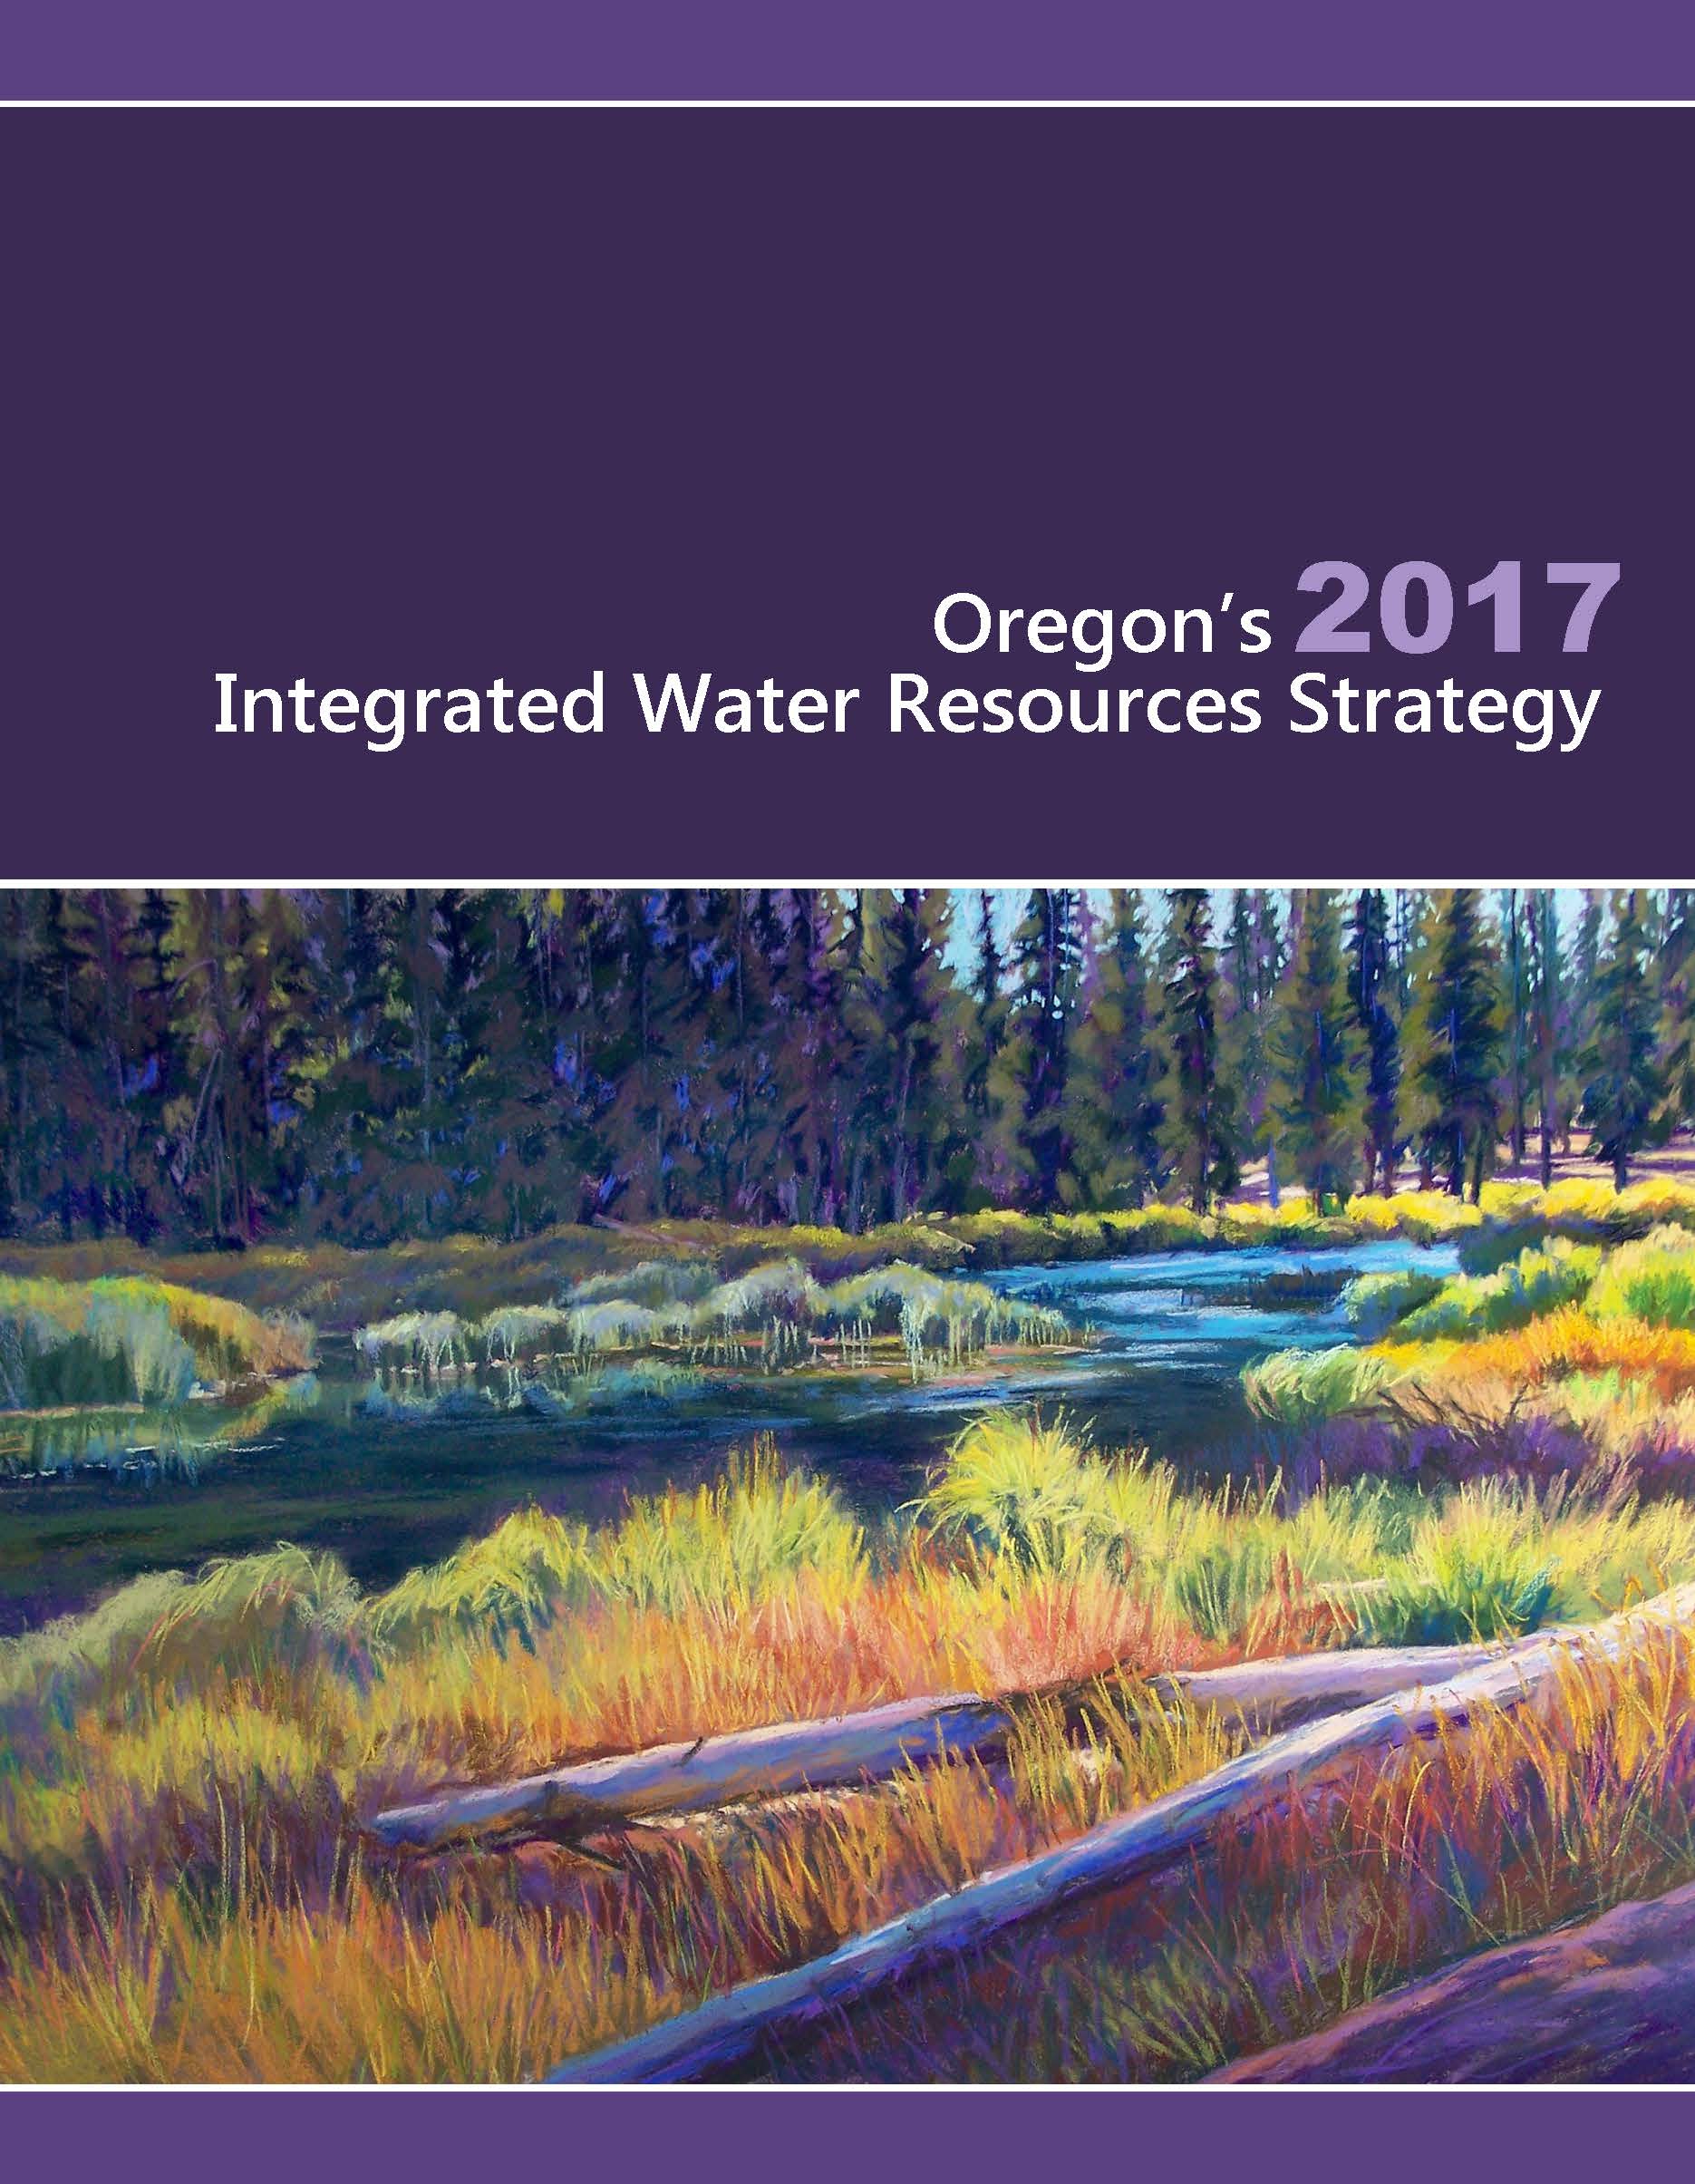 A photo of the cover page of the Integrated Water Resouces Strategy Publication